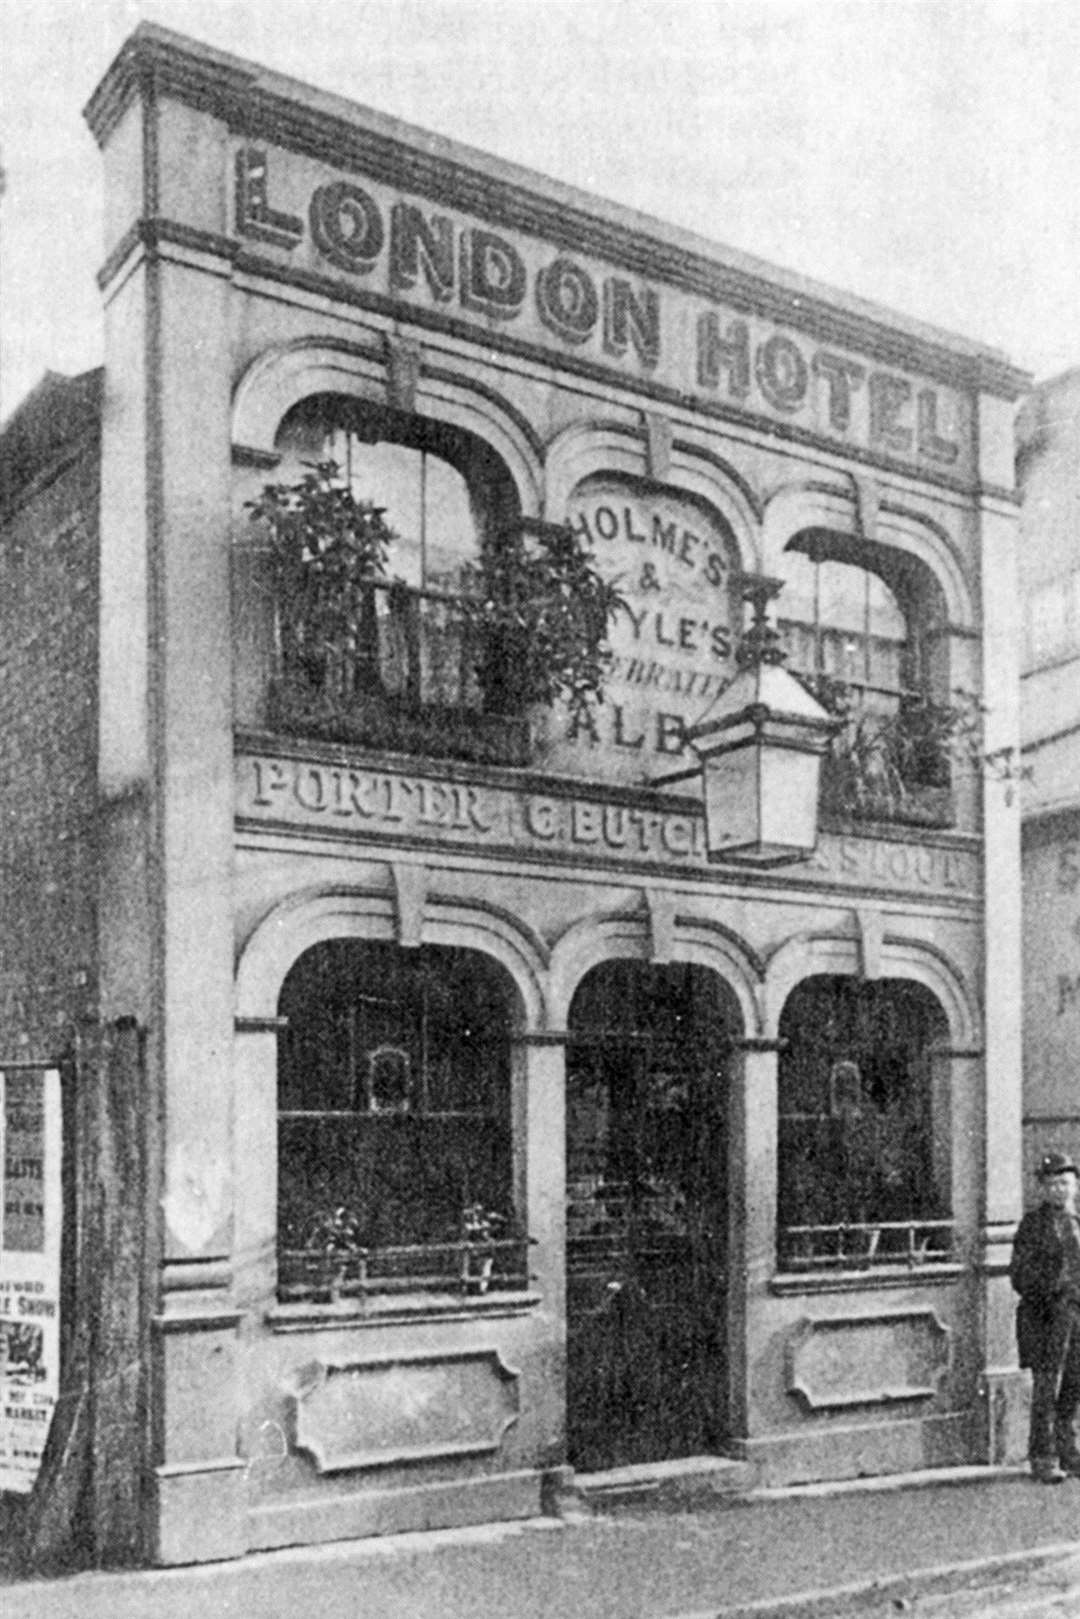 The London Hotel, used to operate at 110 Week Street Picture: Amberley Publishing